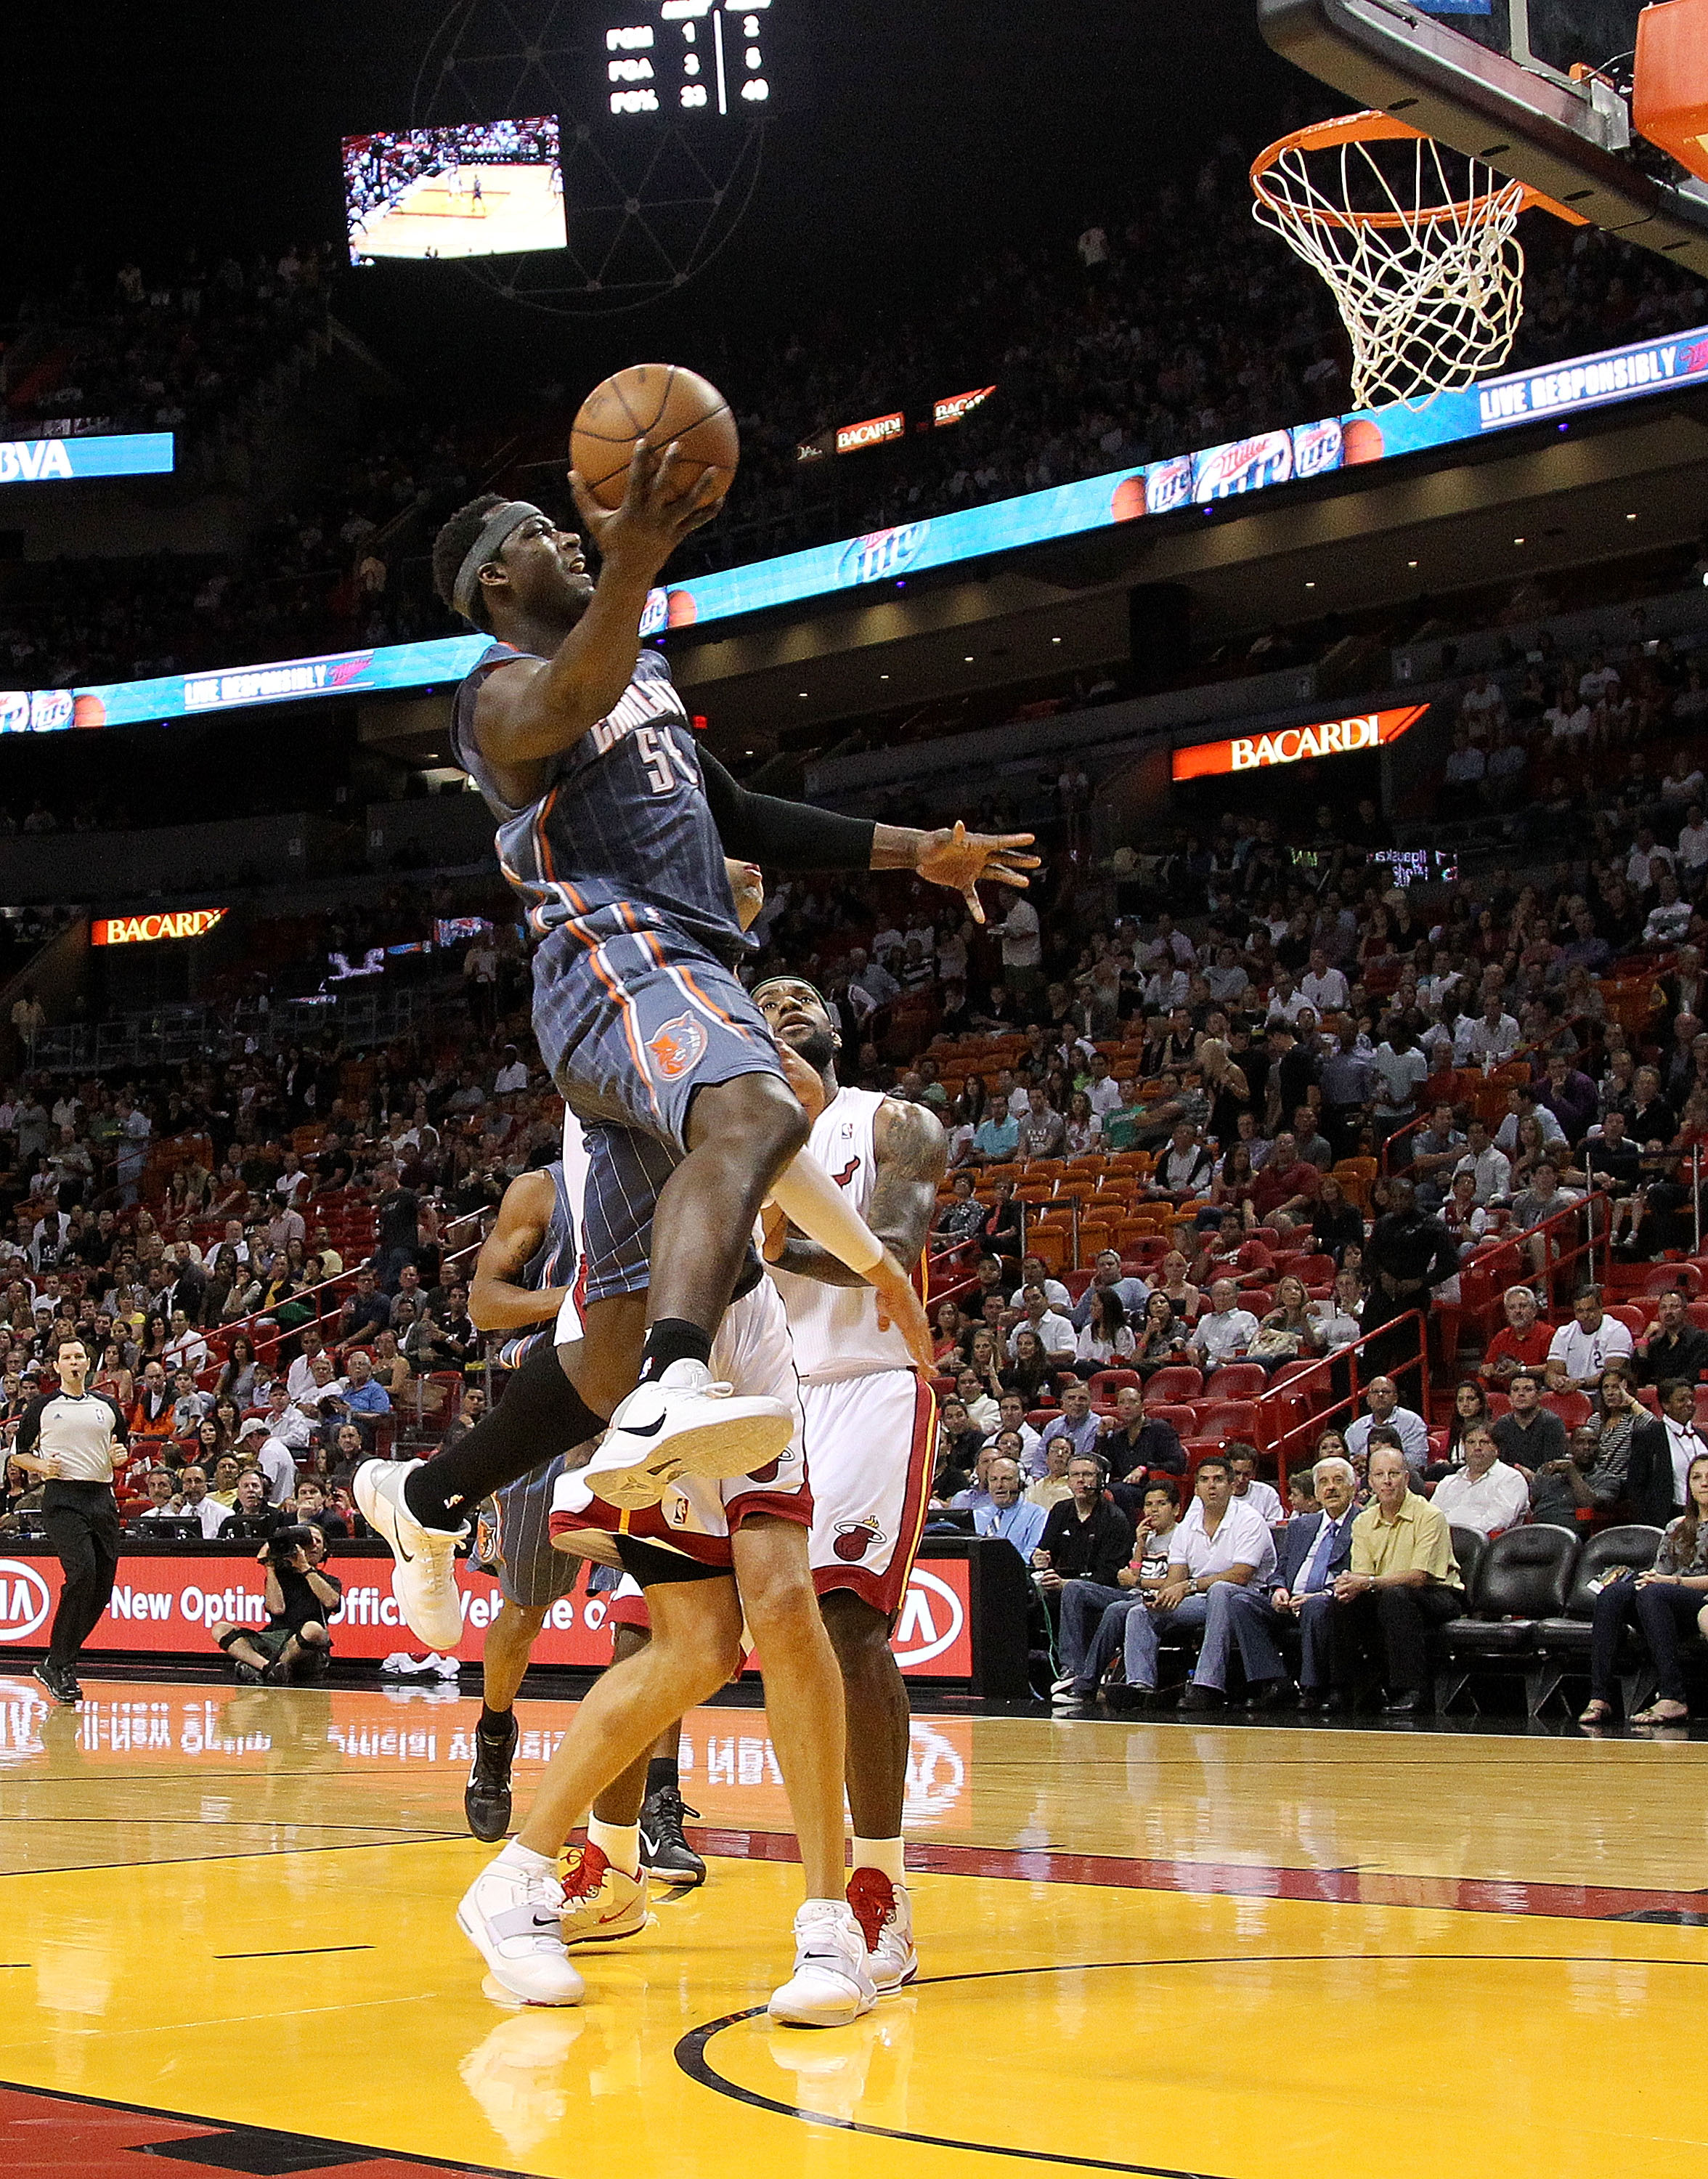 MIAMI, FL - APRIL 08:  Kwame Brown #54 of the Charlotte Bobcats drives to the lane during a game against the Miami Heat at American Airlines Arena on April 8, 2011 in Miami, Florida. NOTE TO USER: User expressly acknowledges and agrees that, by downloadin